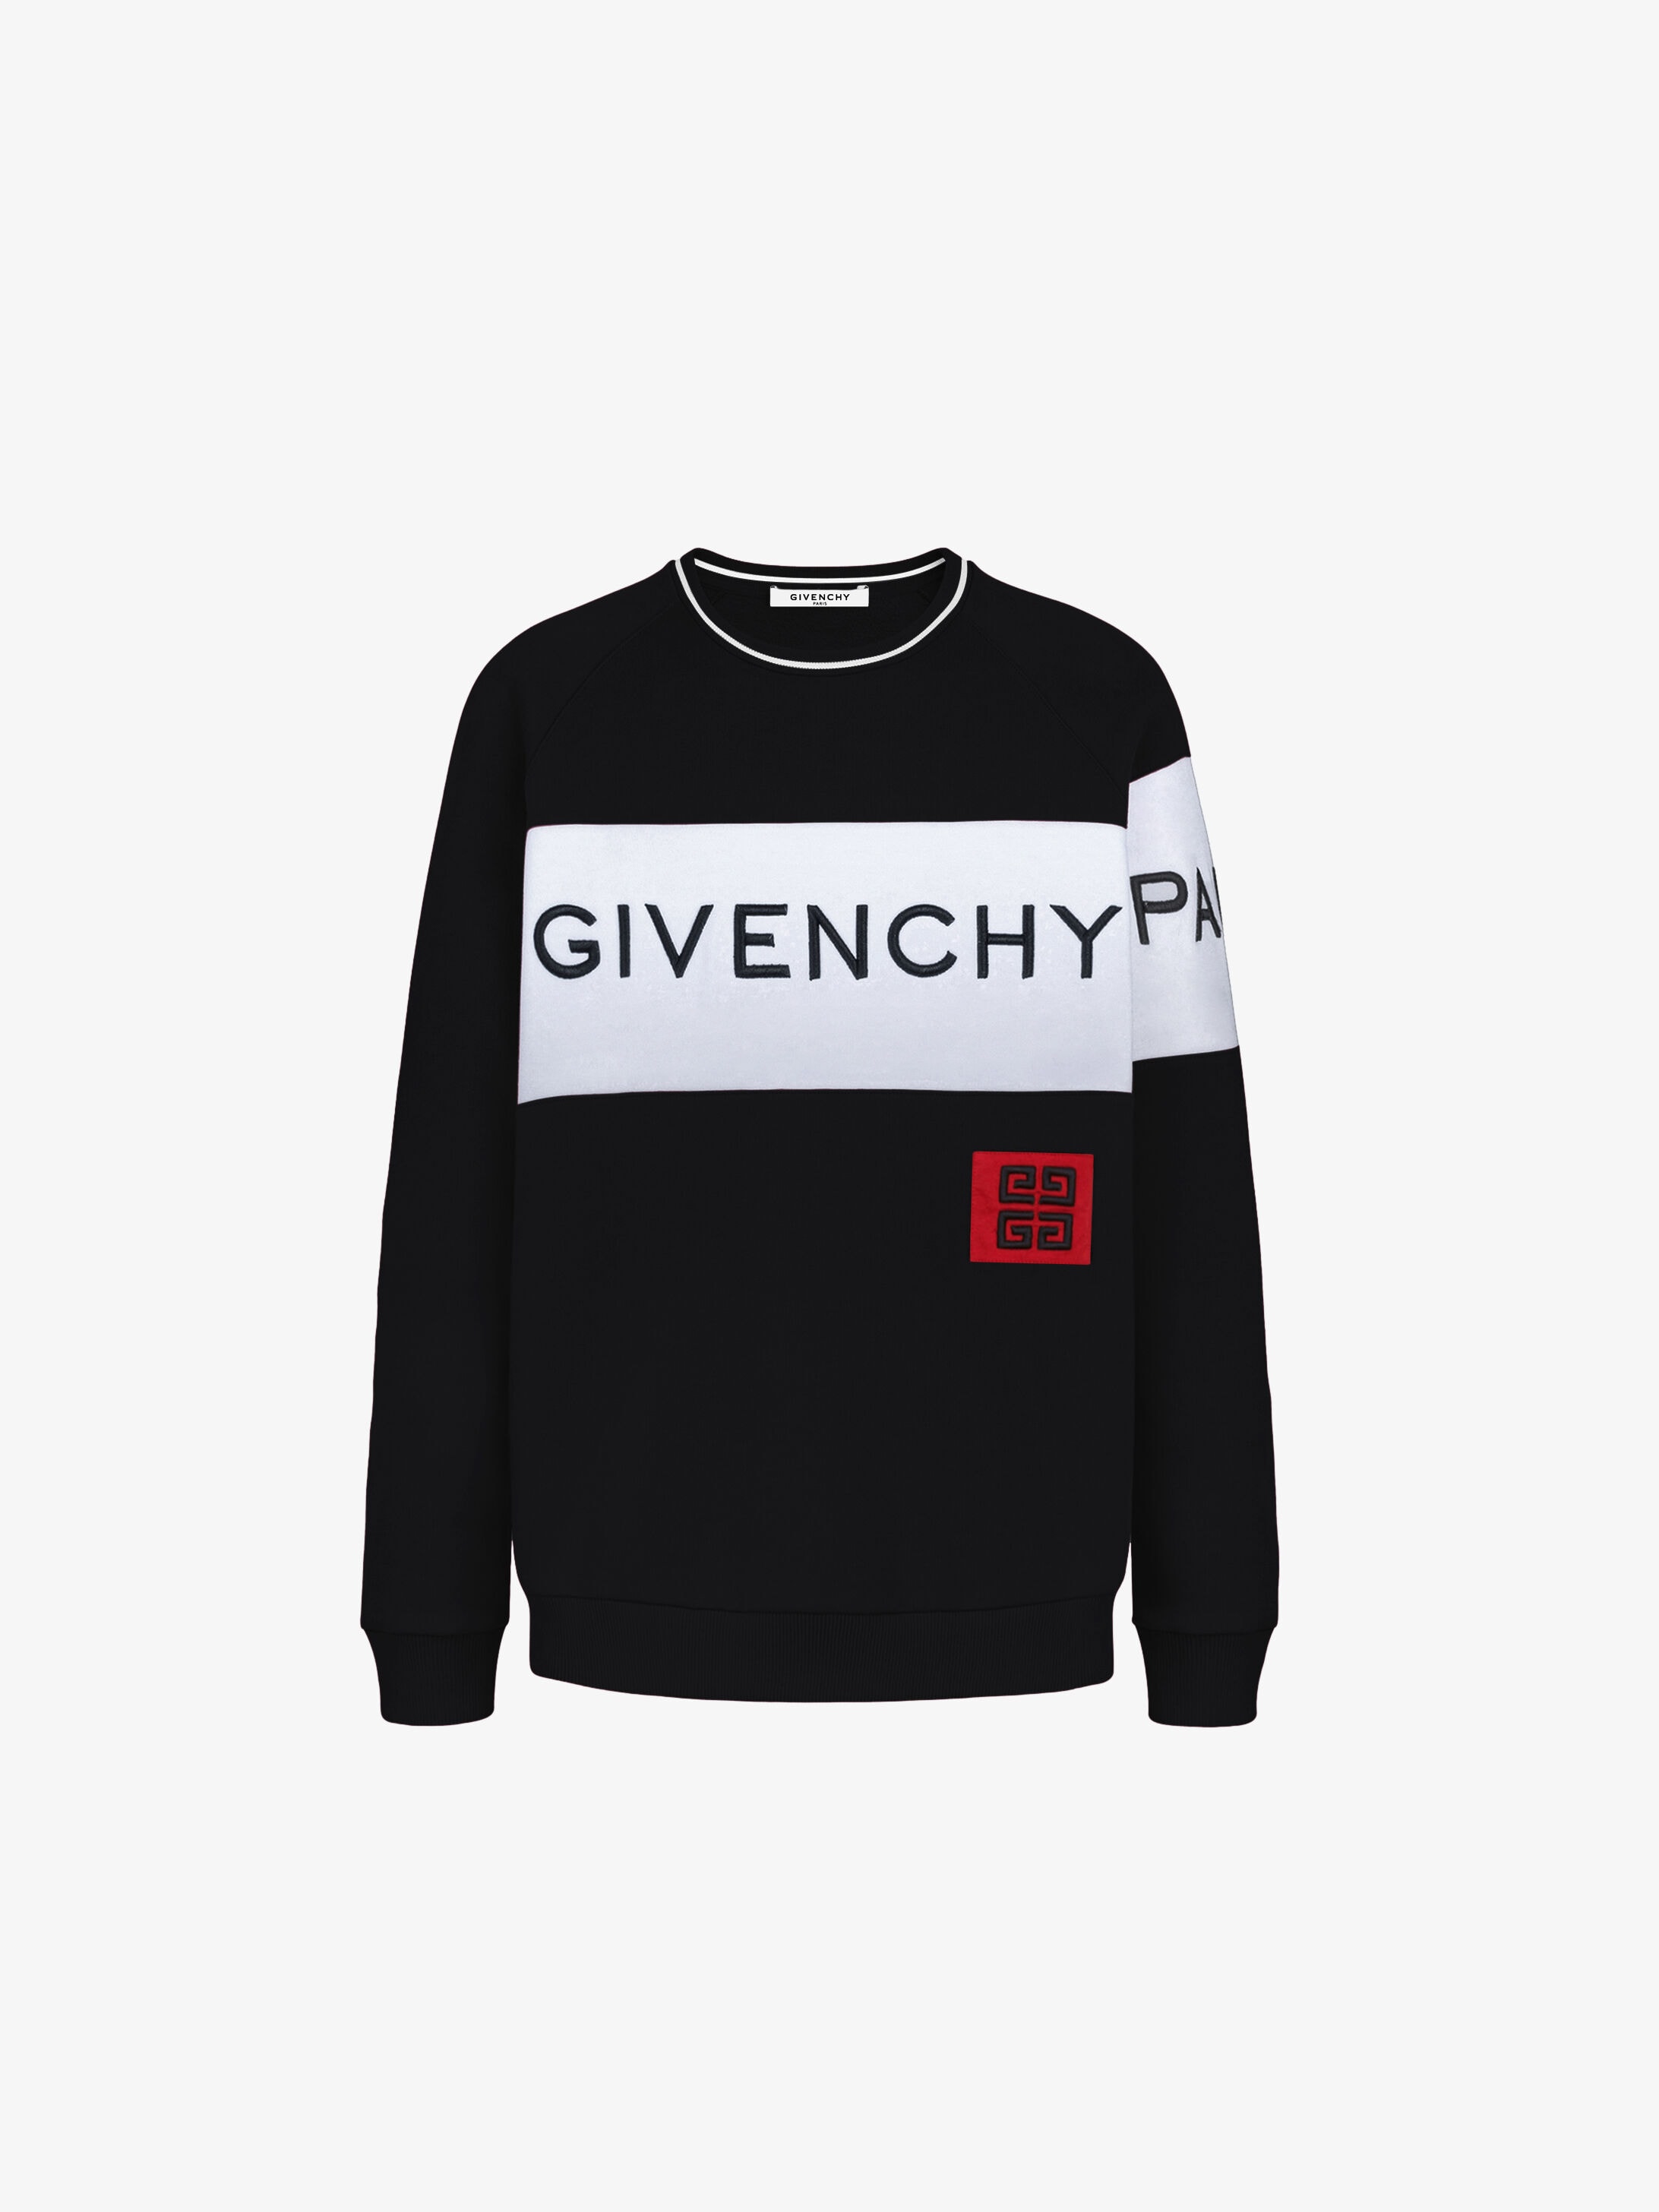 givenchy sweater black